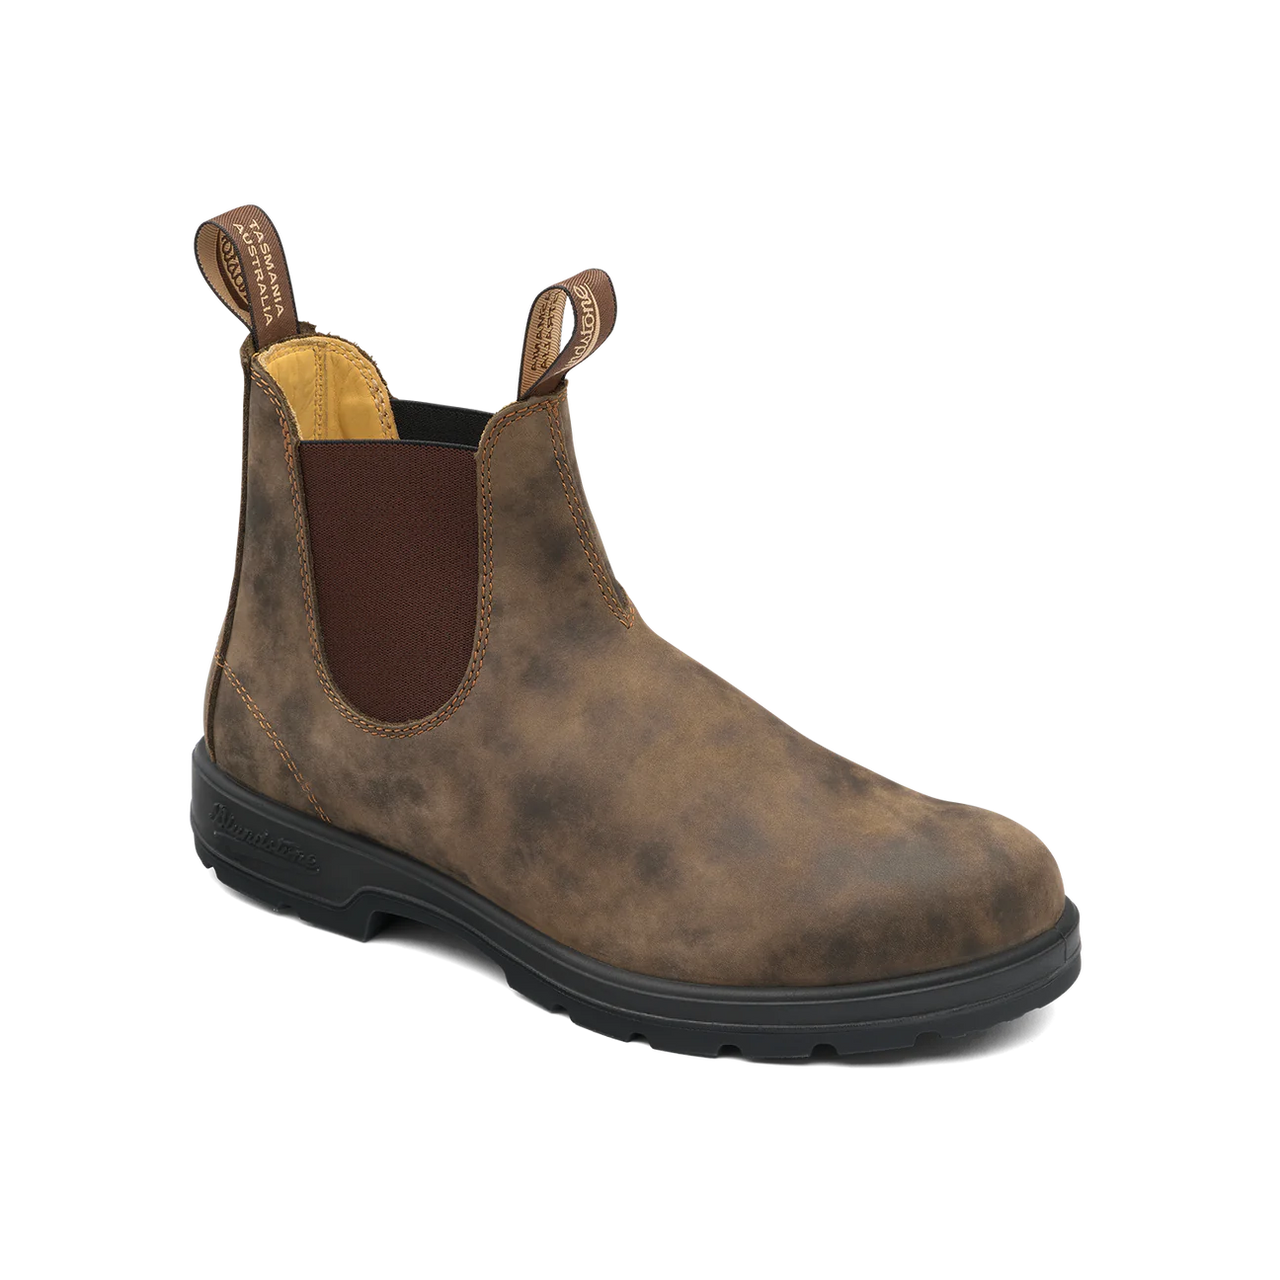 Blundstone Unisex #585 Classic Boots - Rustic Brown